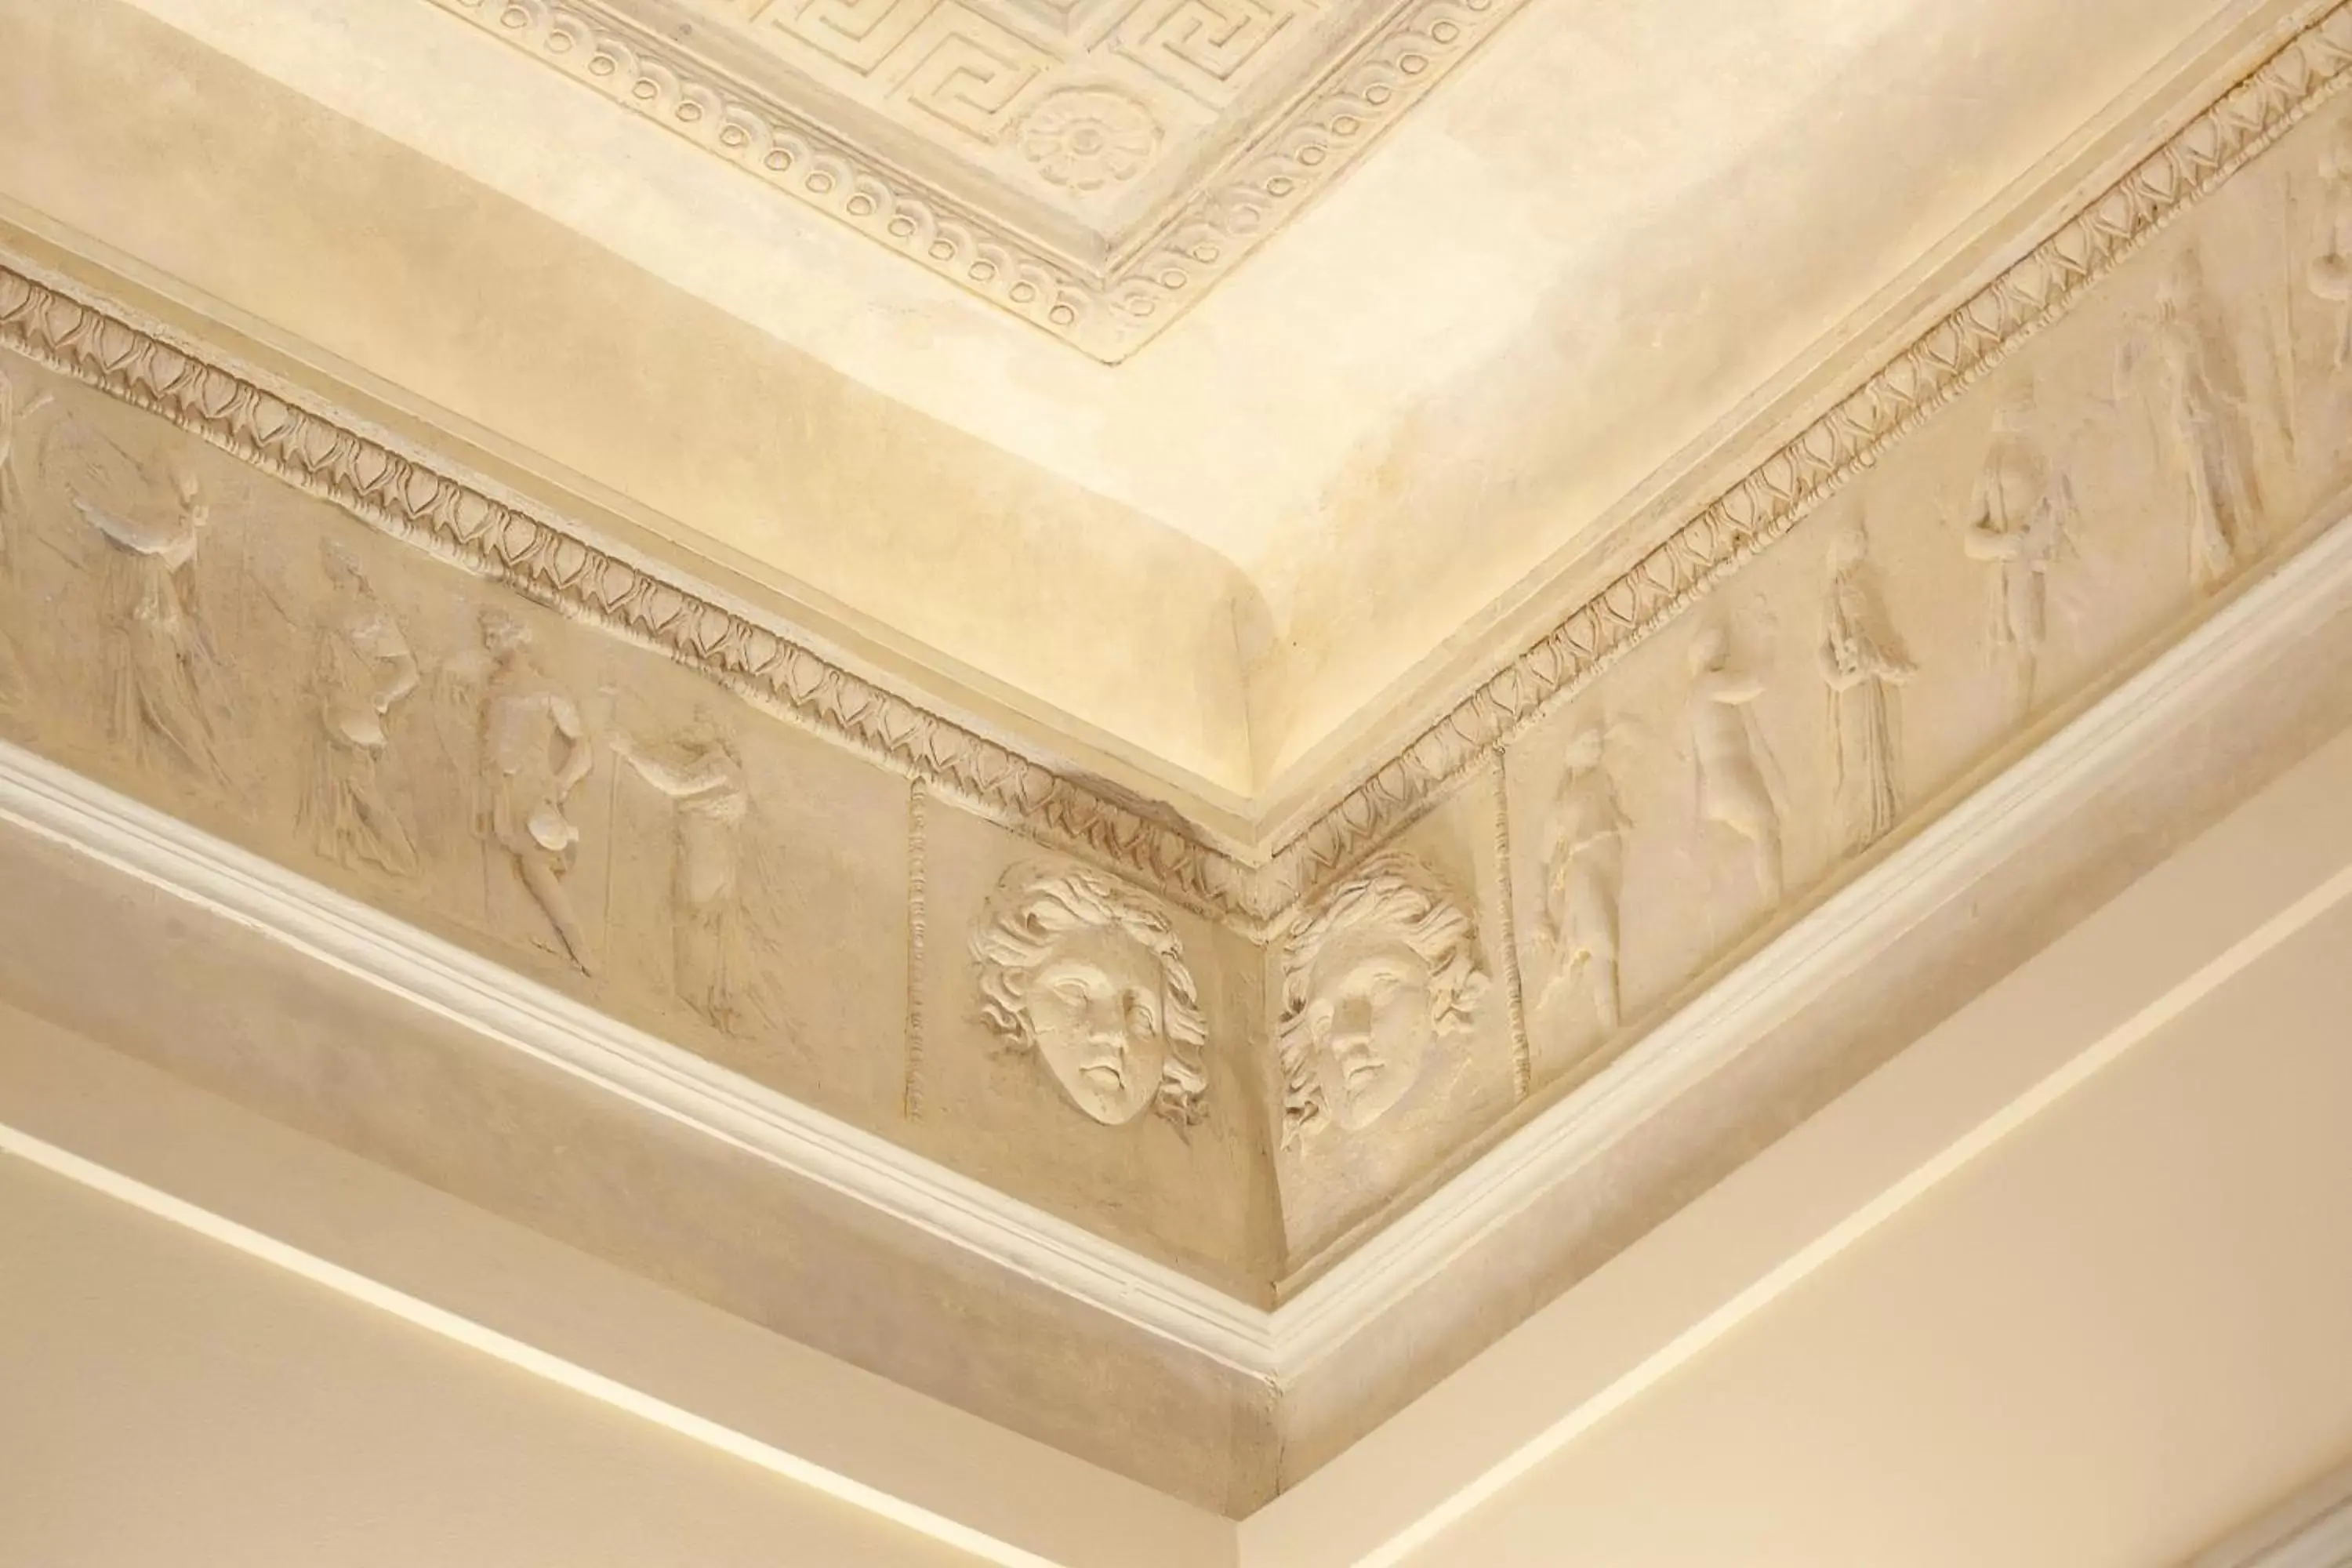 Decorative detail in Athens 1890 Hotel & Spa